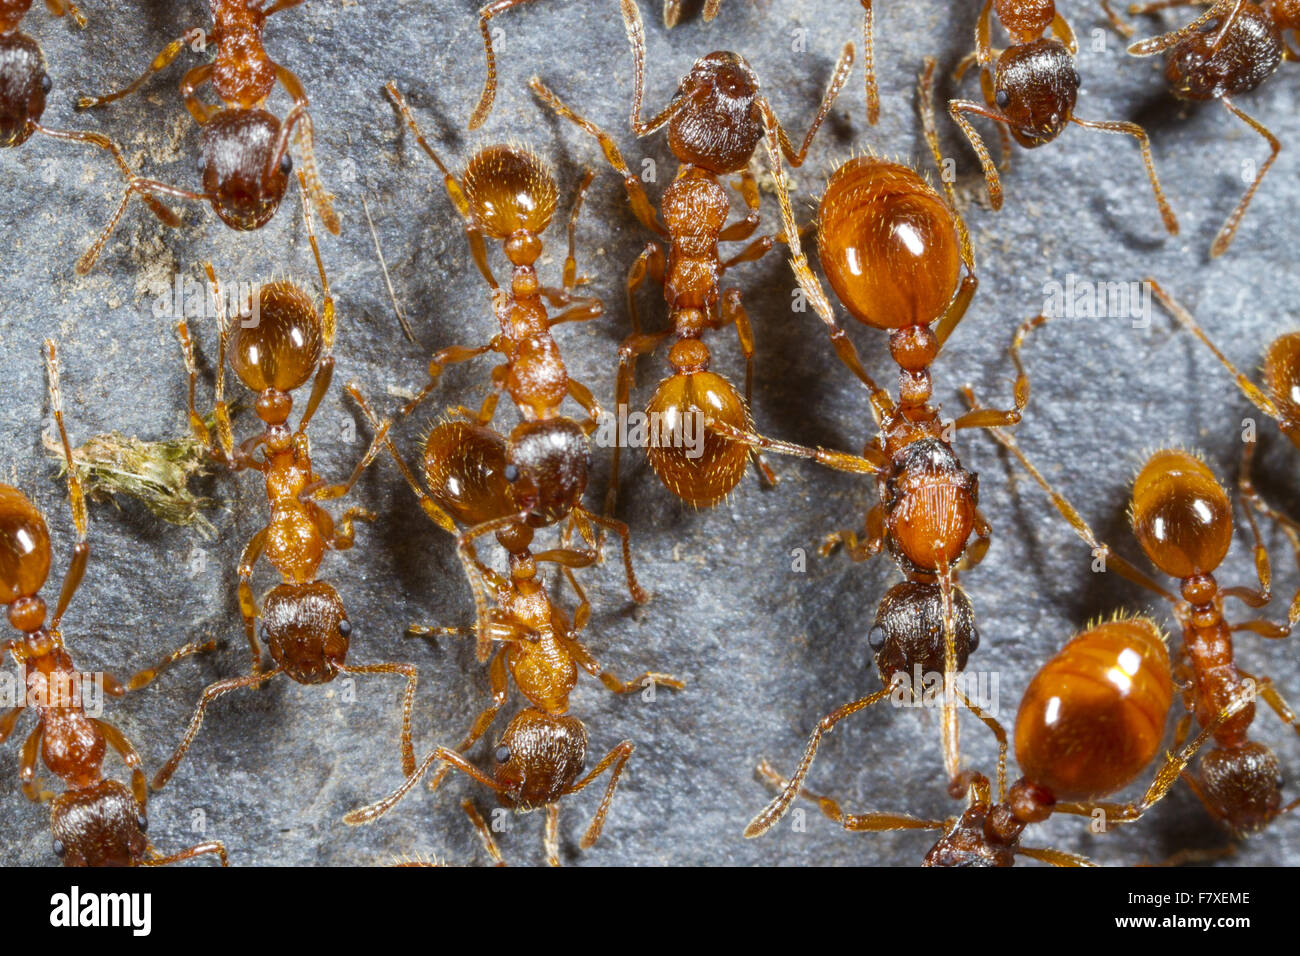 The Gold Digger Giant Ants of Ancient India